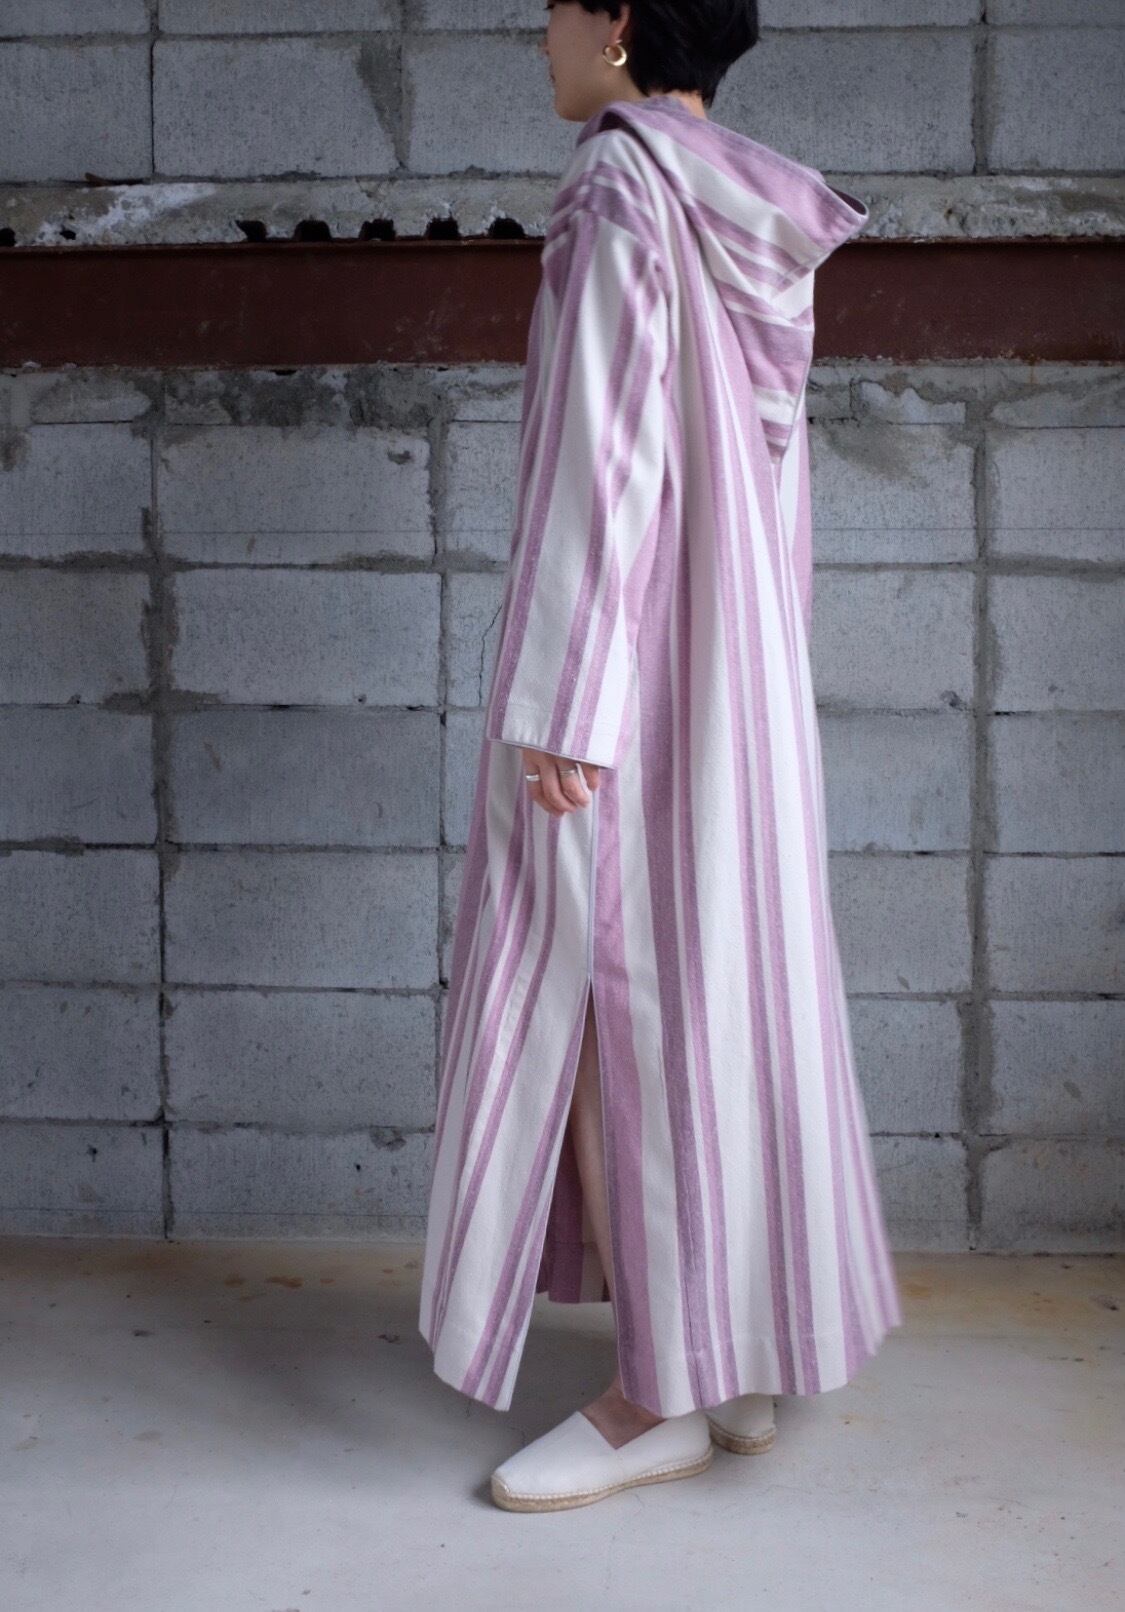 [WRYHT] CONE HOODED MAXI TUNIC ROSE STRIPE | YES-姫路の美容院と服のお店YES(イエス)です。  powered by BASE